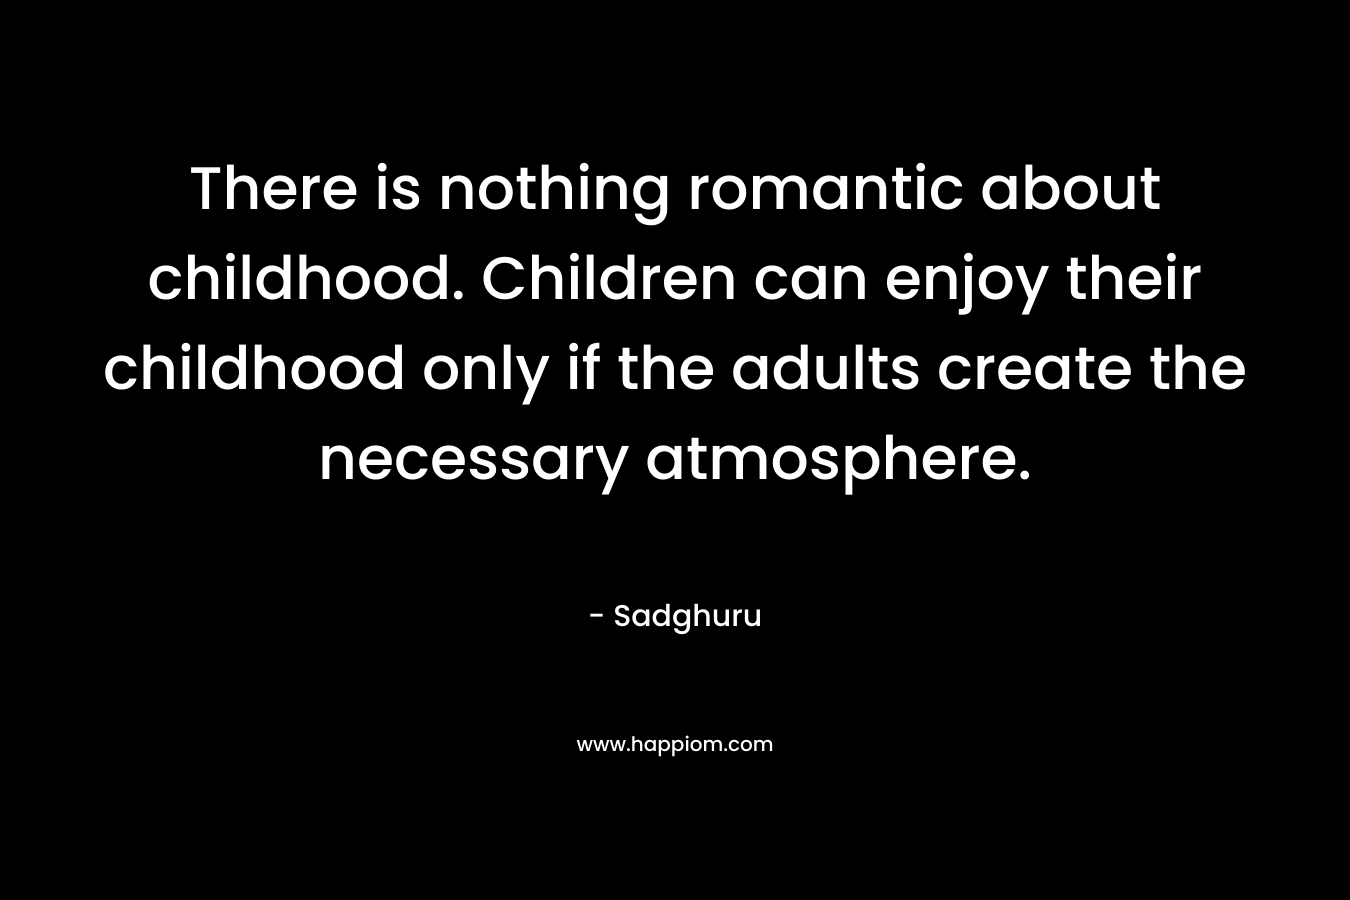 There is nothing romantic about childhood. Children can enjoy their childhood only if the adults create the necessary atmosphere.